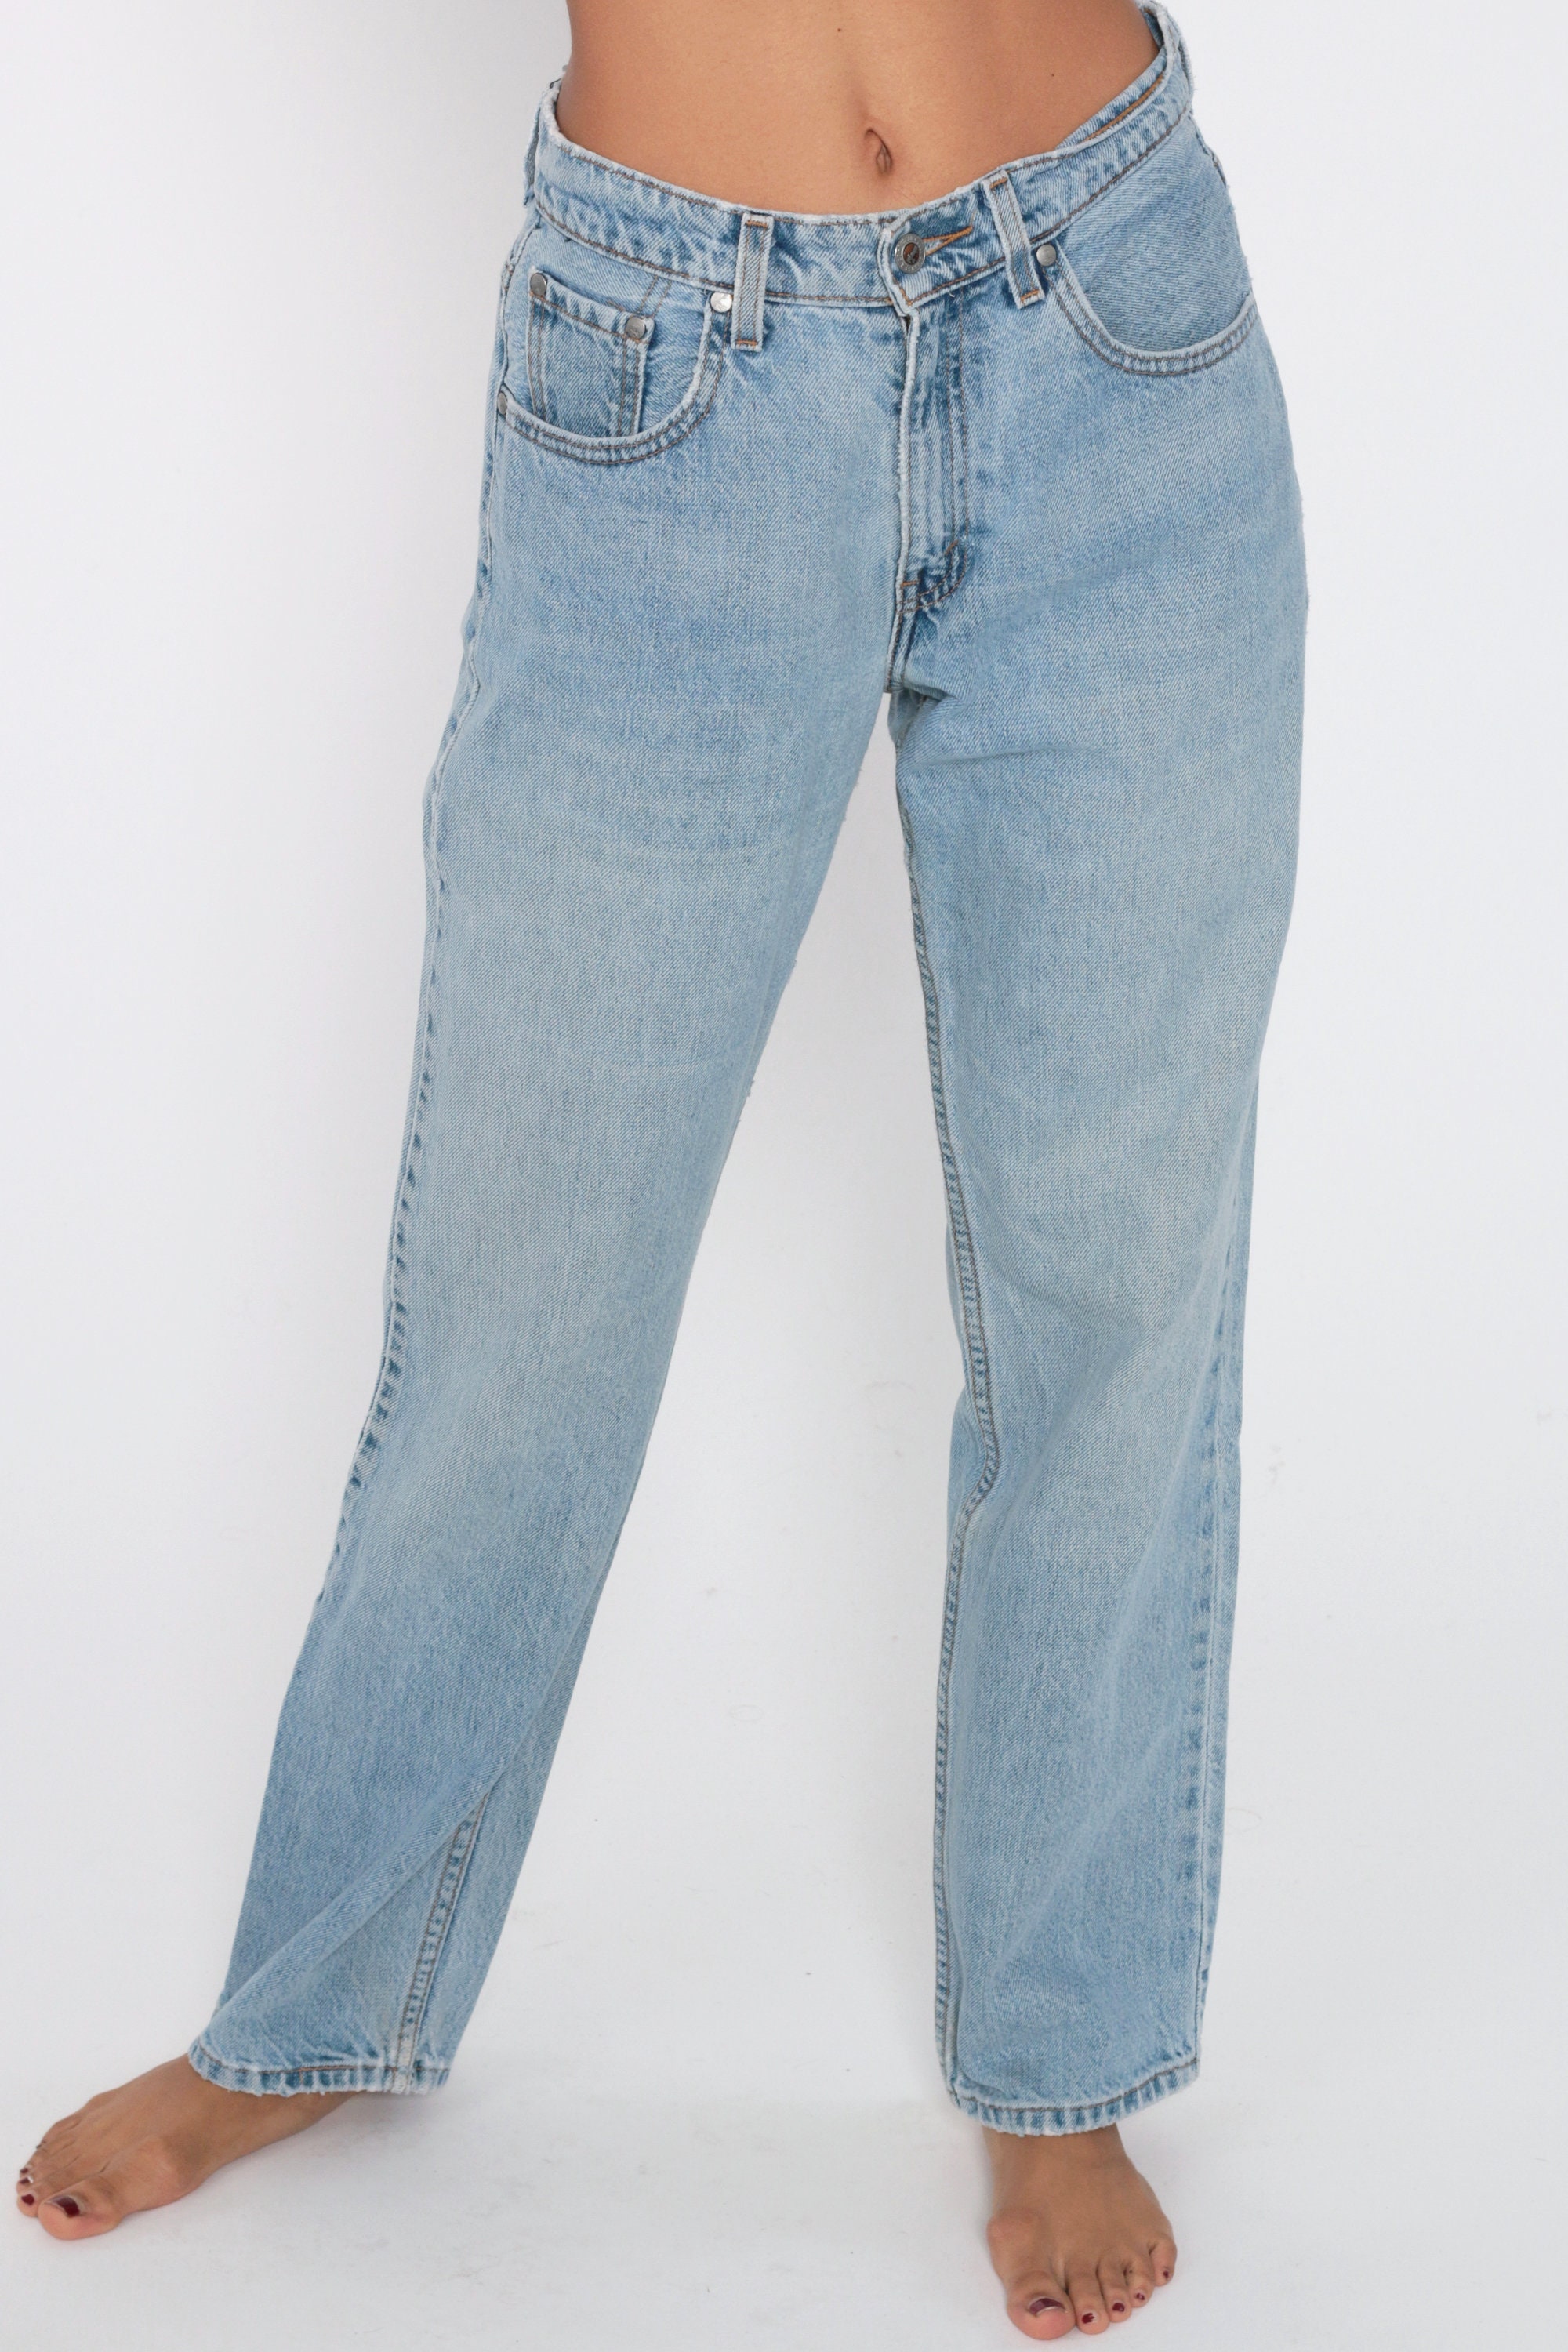 Levis Silvertab Jeans Levi Mom Jeans 90s High Waist Jeans Denim Pants Guy&#39;s Fit Relaxed Tapered ...